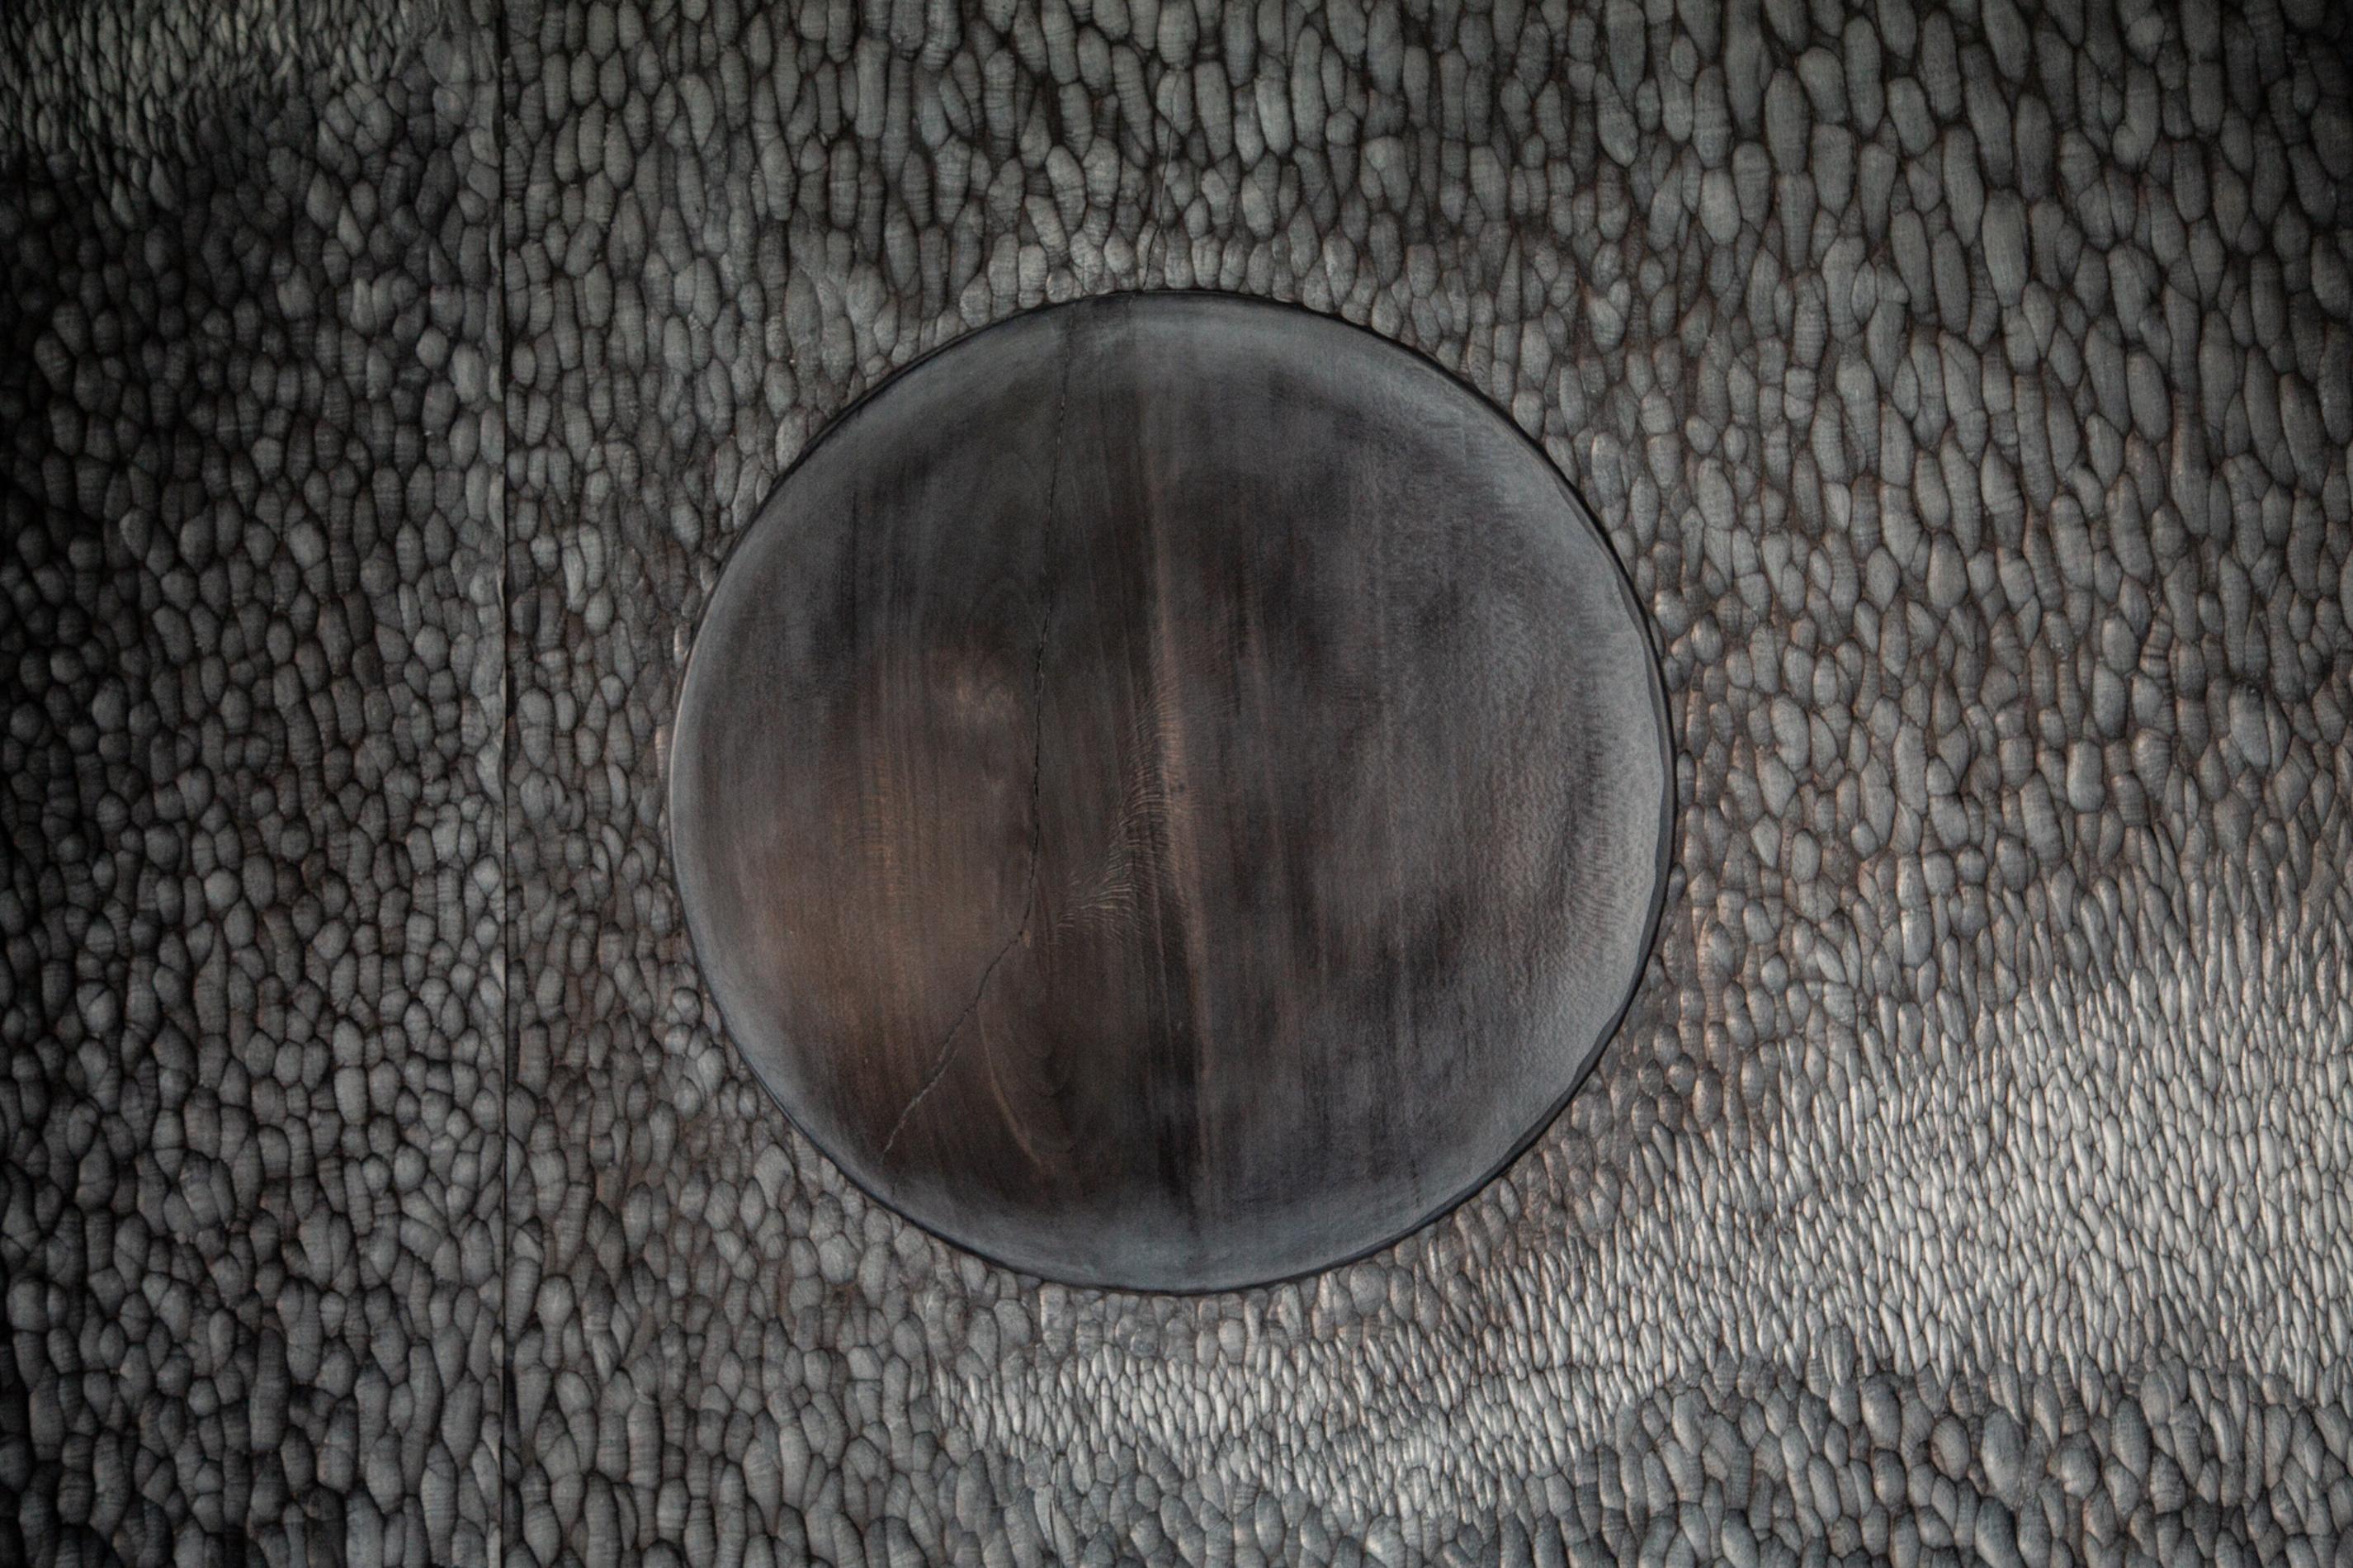 An intricately carved wall mounted screen representing the full moon and clouds reflecting on a pool of rippling water.  This piece has a Japanese aesthetic, both striking and calming in atmosphere it is entirely hand-carved in three panels of